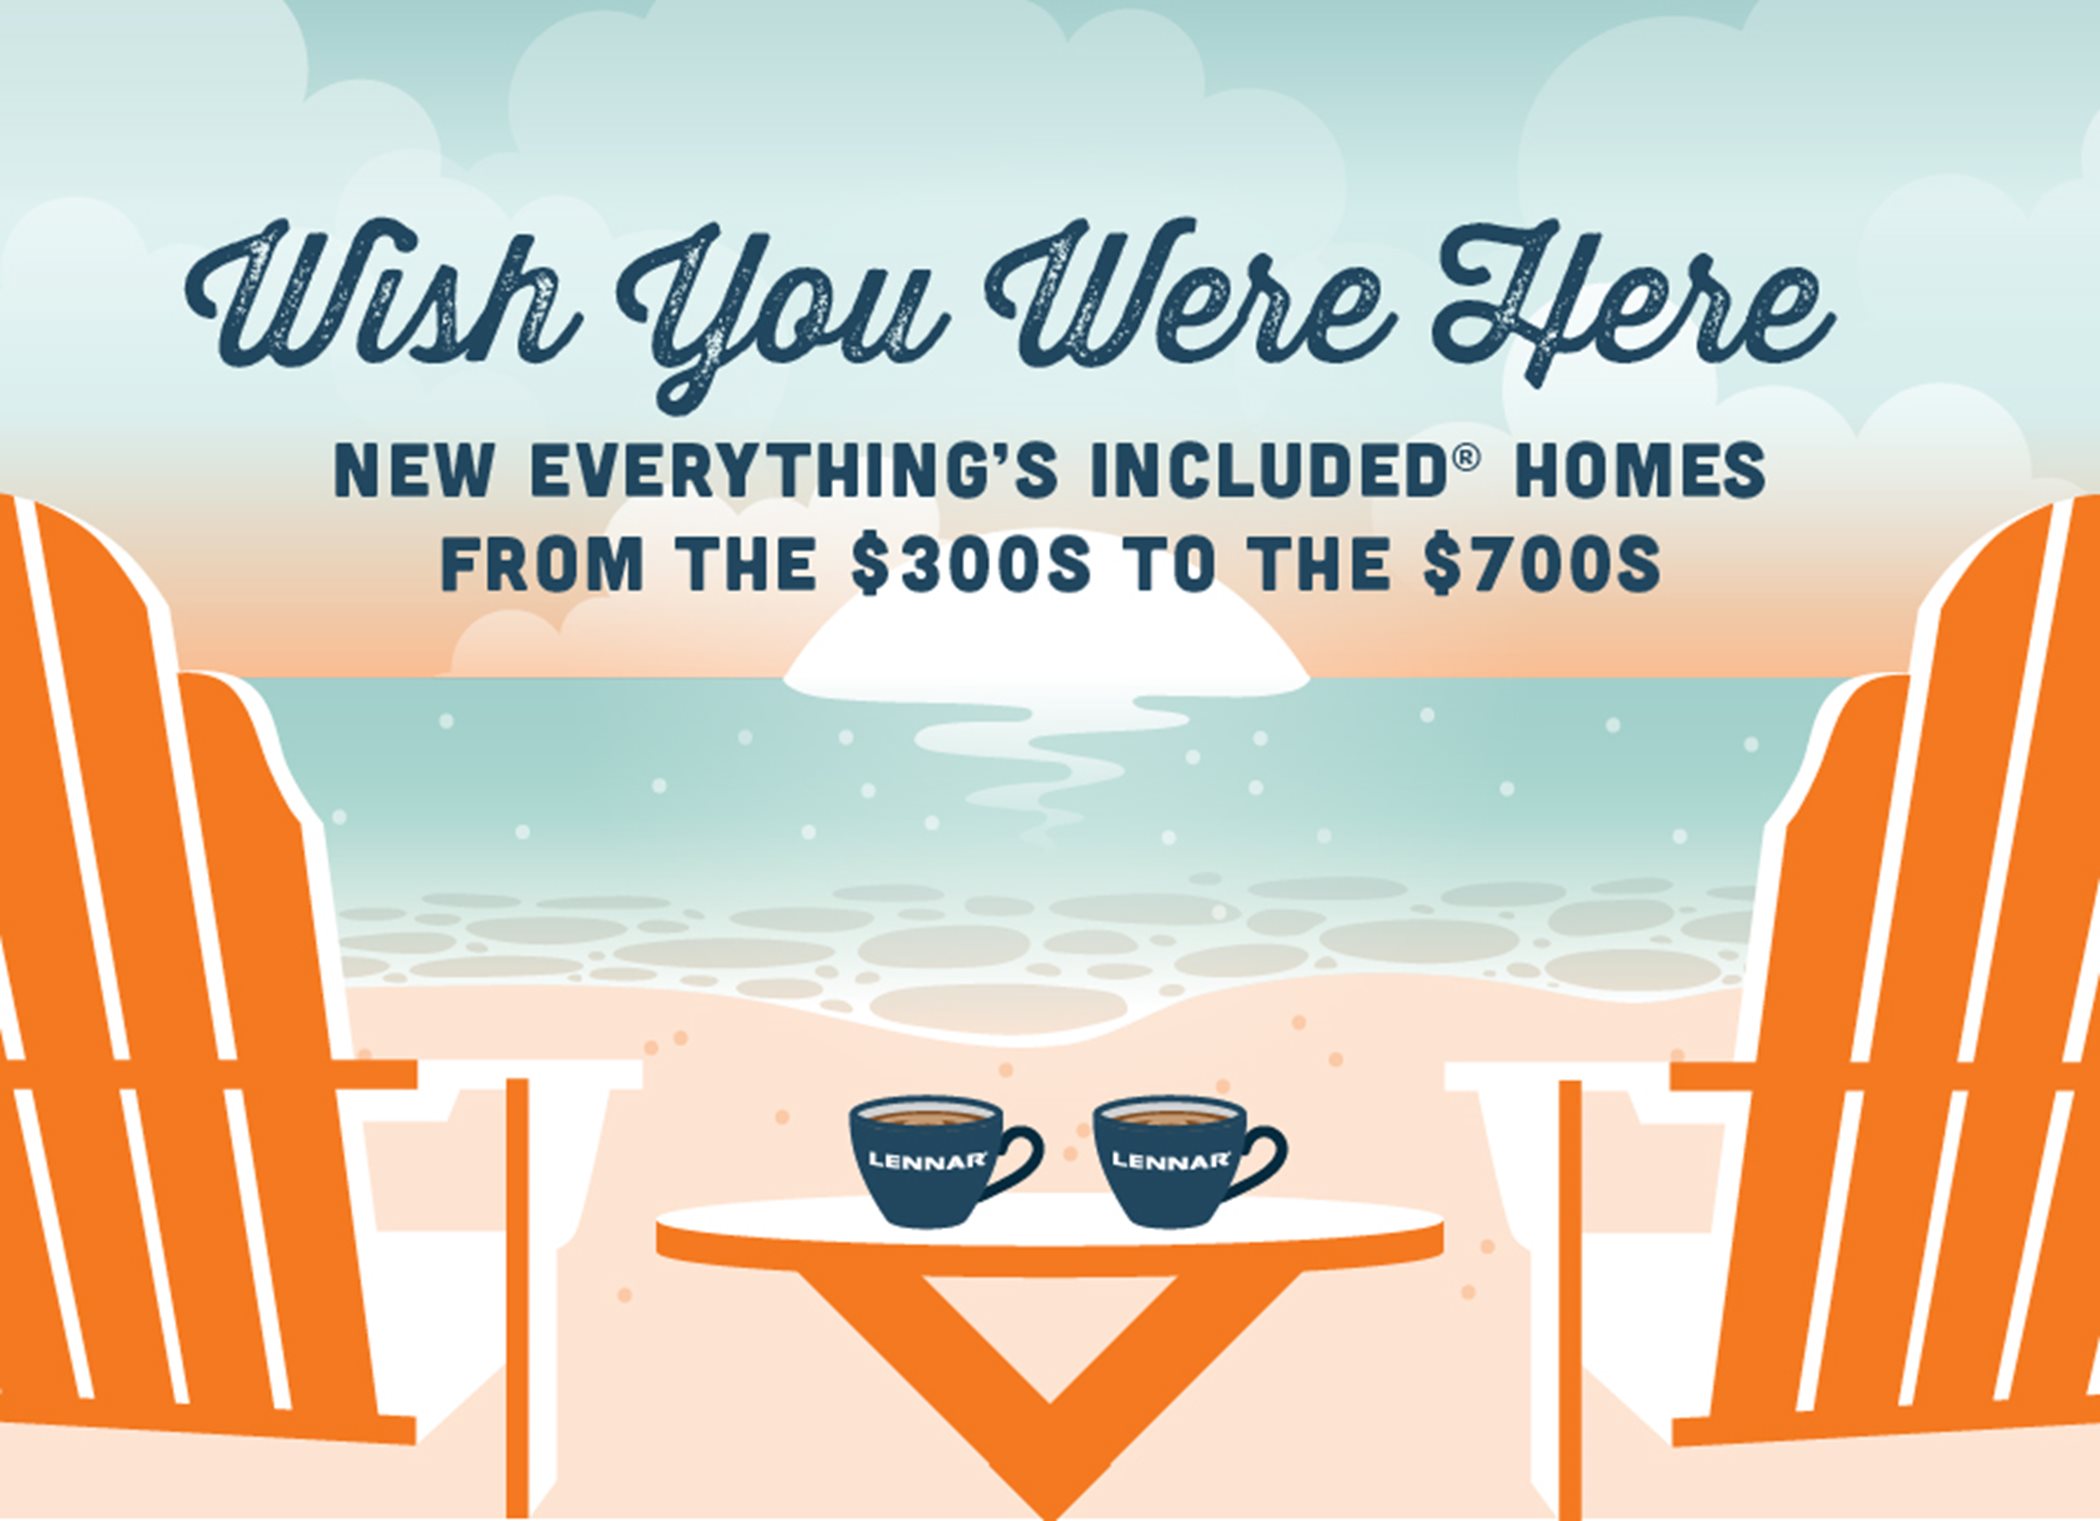 TEXT: Wish You were Here - New Everything's Included Homes from the $300s to $700s IMAGE: Two chairs overlooking ocean sunset